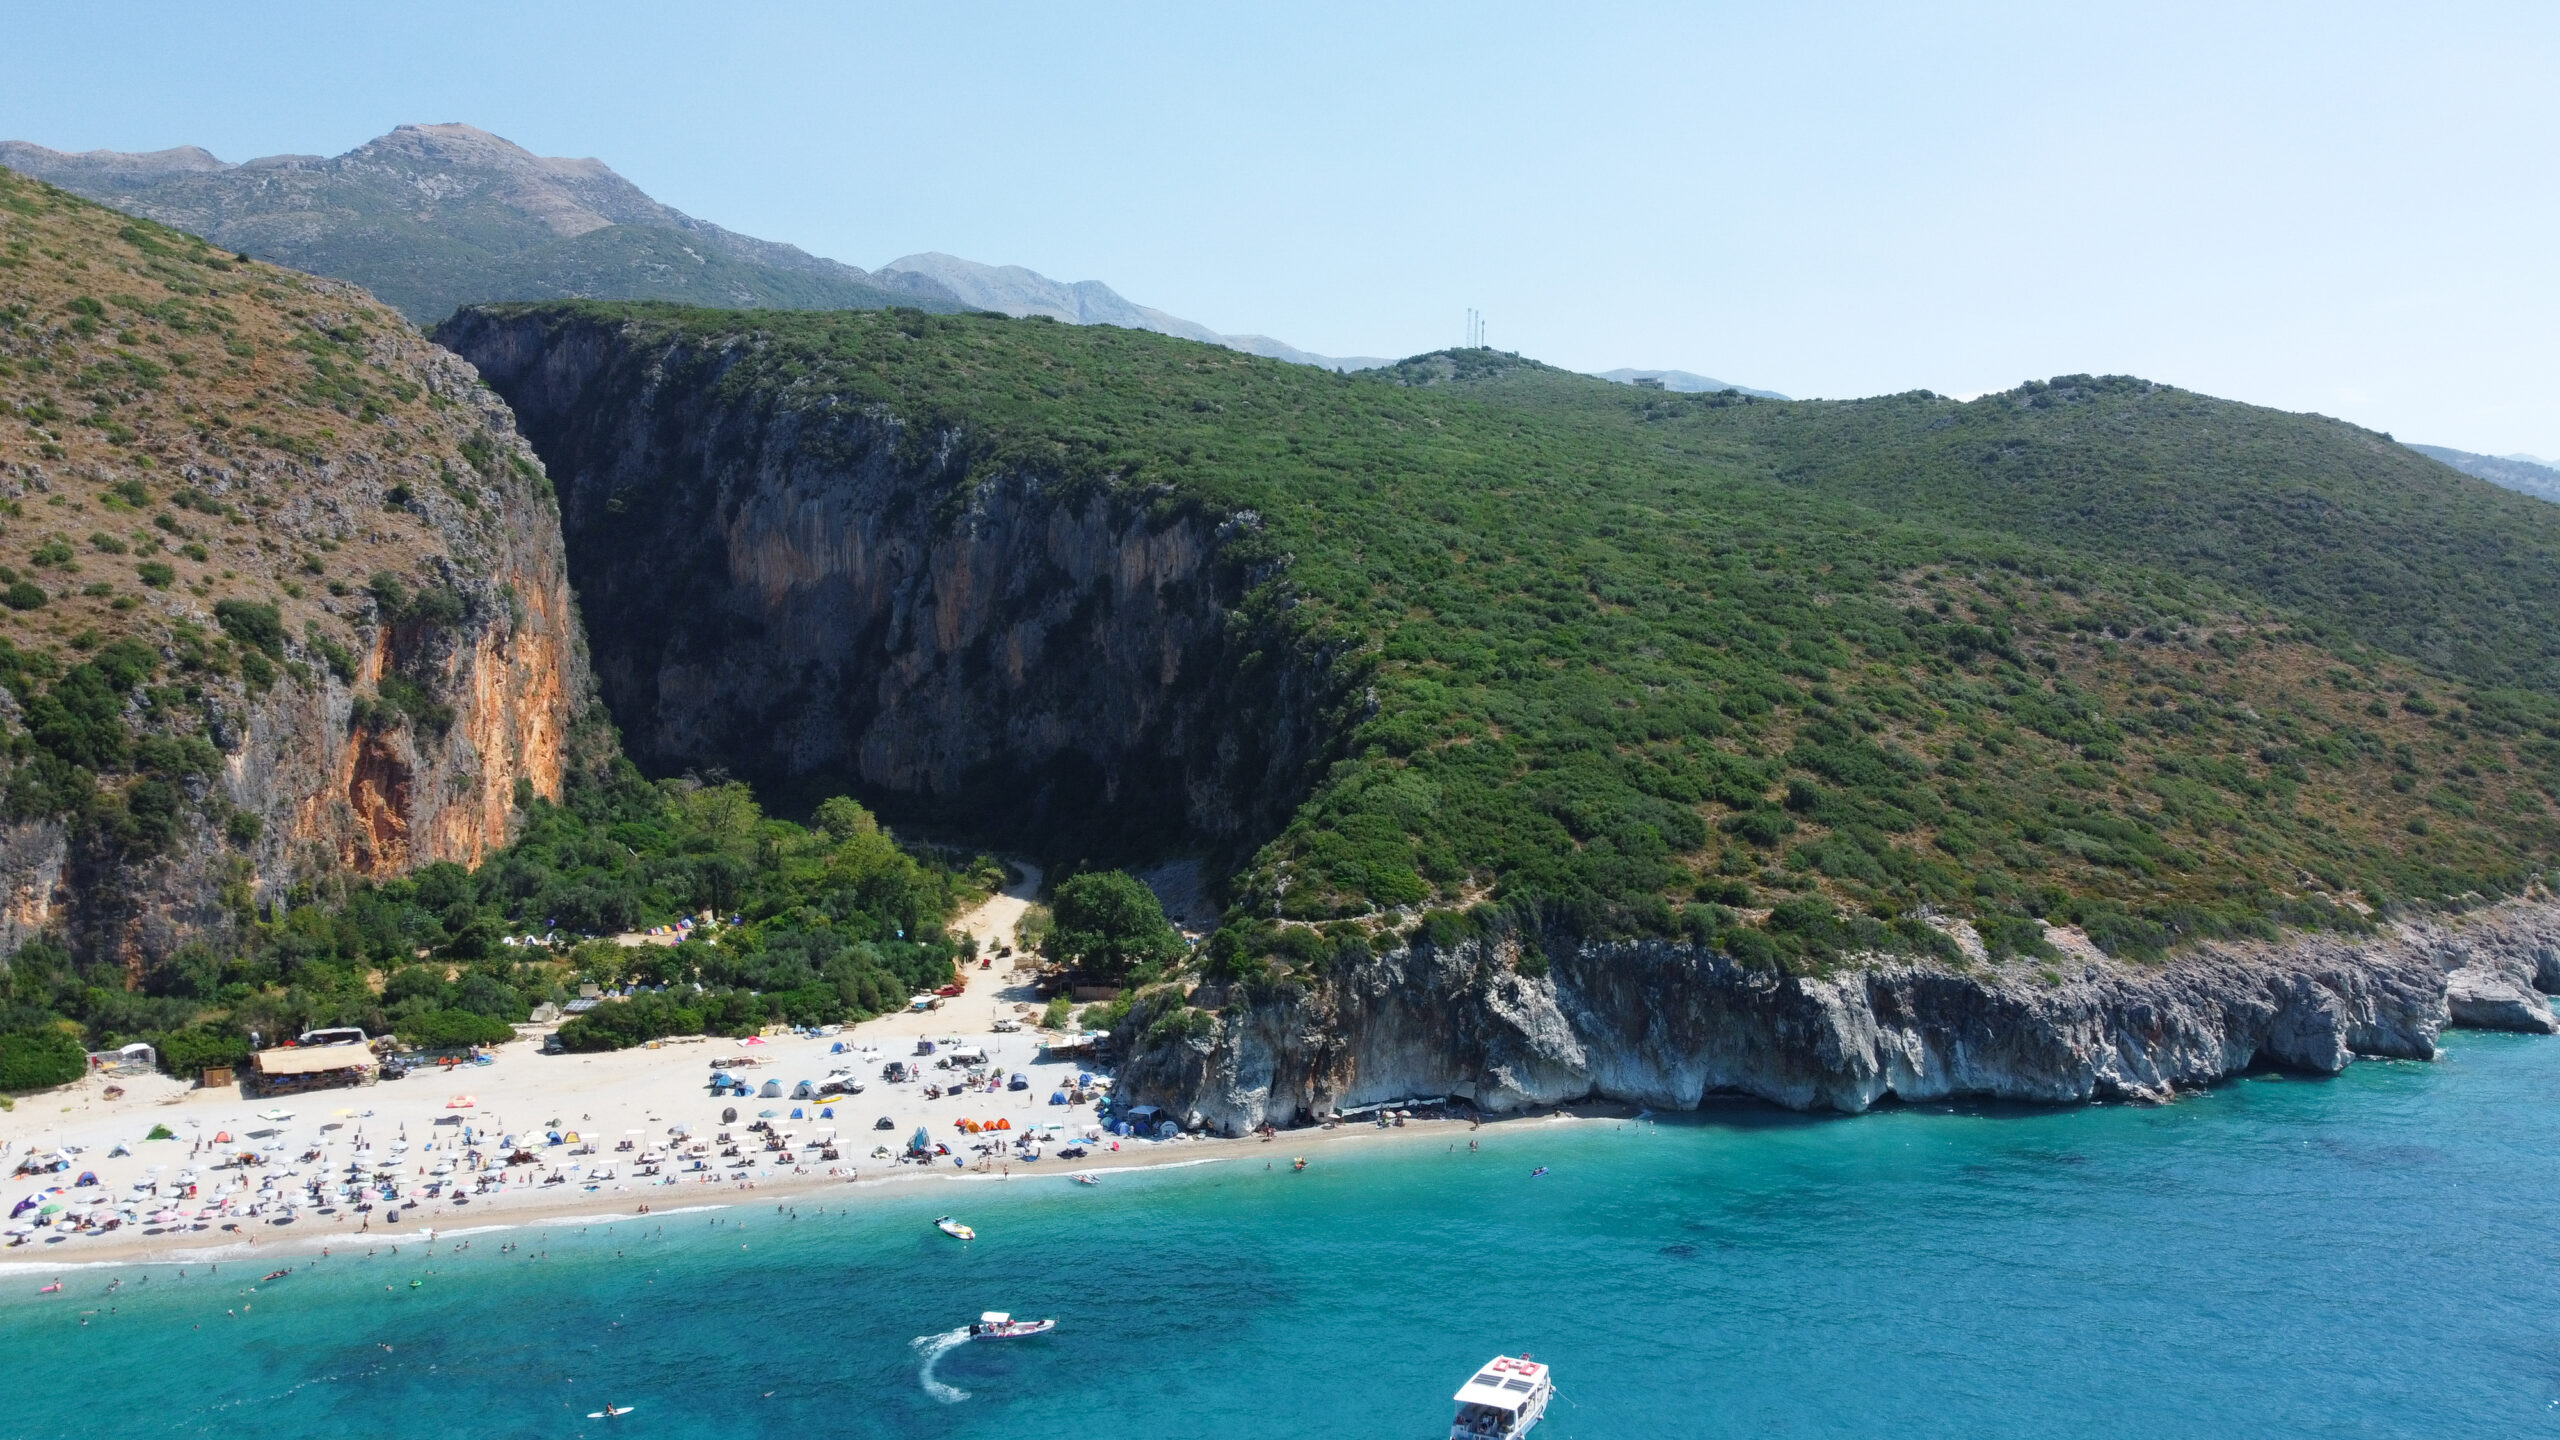 The Albanian Riviera might be Europe's best kept secret - 2 Cups of Travel